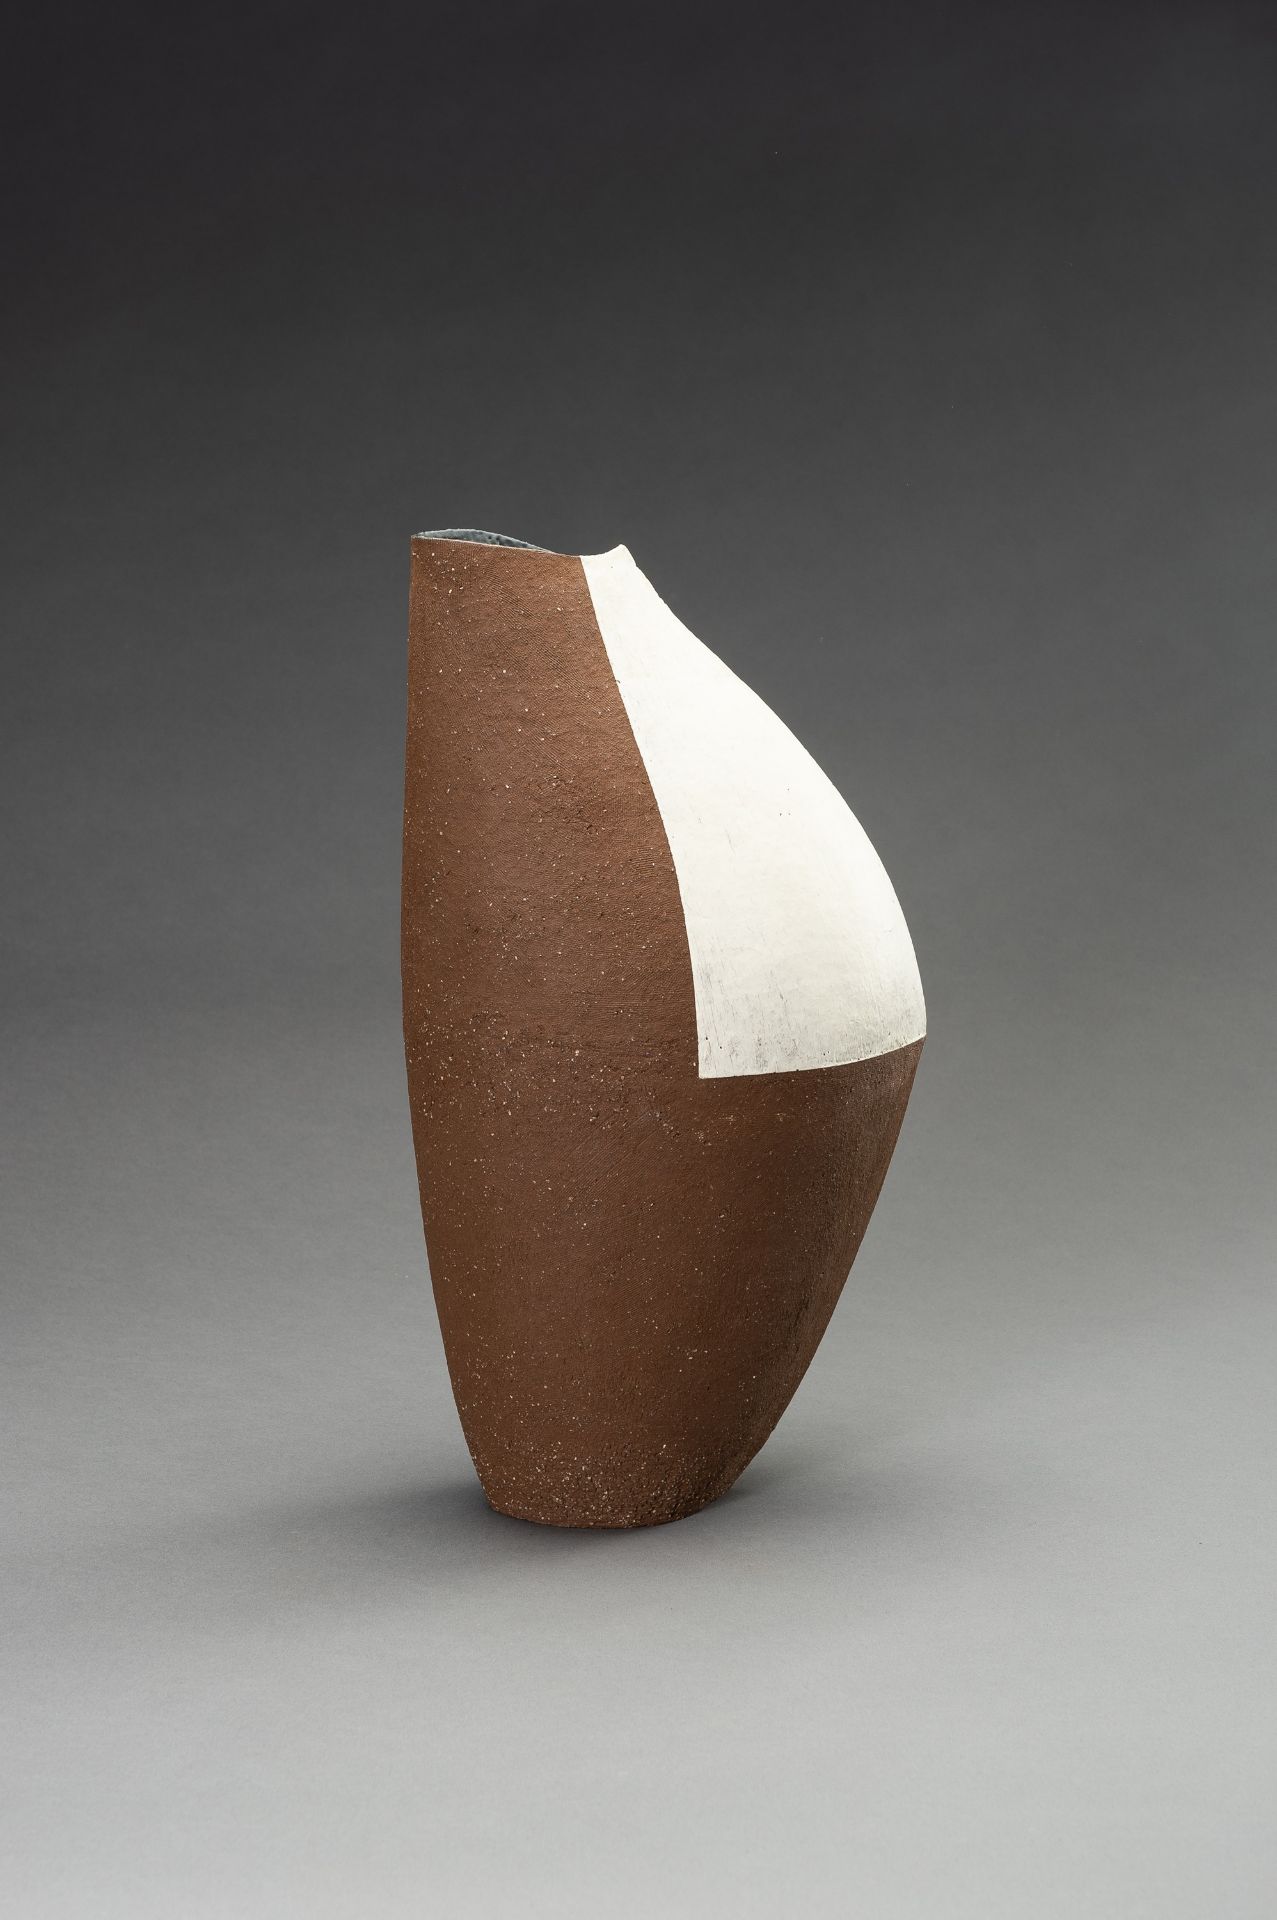 MASA TOSHI: A CONTEMPORARY LACQUERED CERAMIC VASE - Image 7 of 11